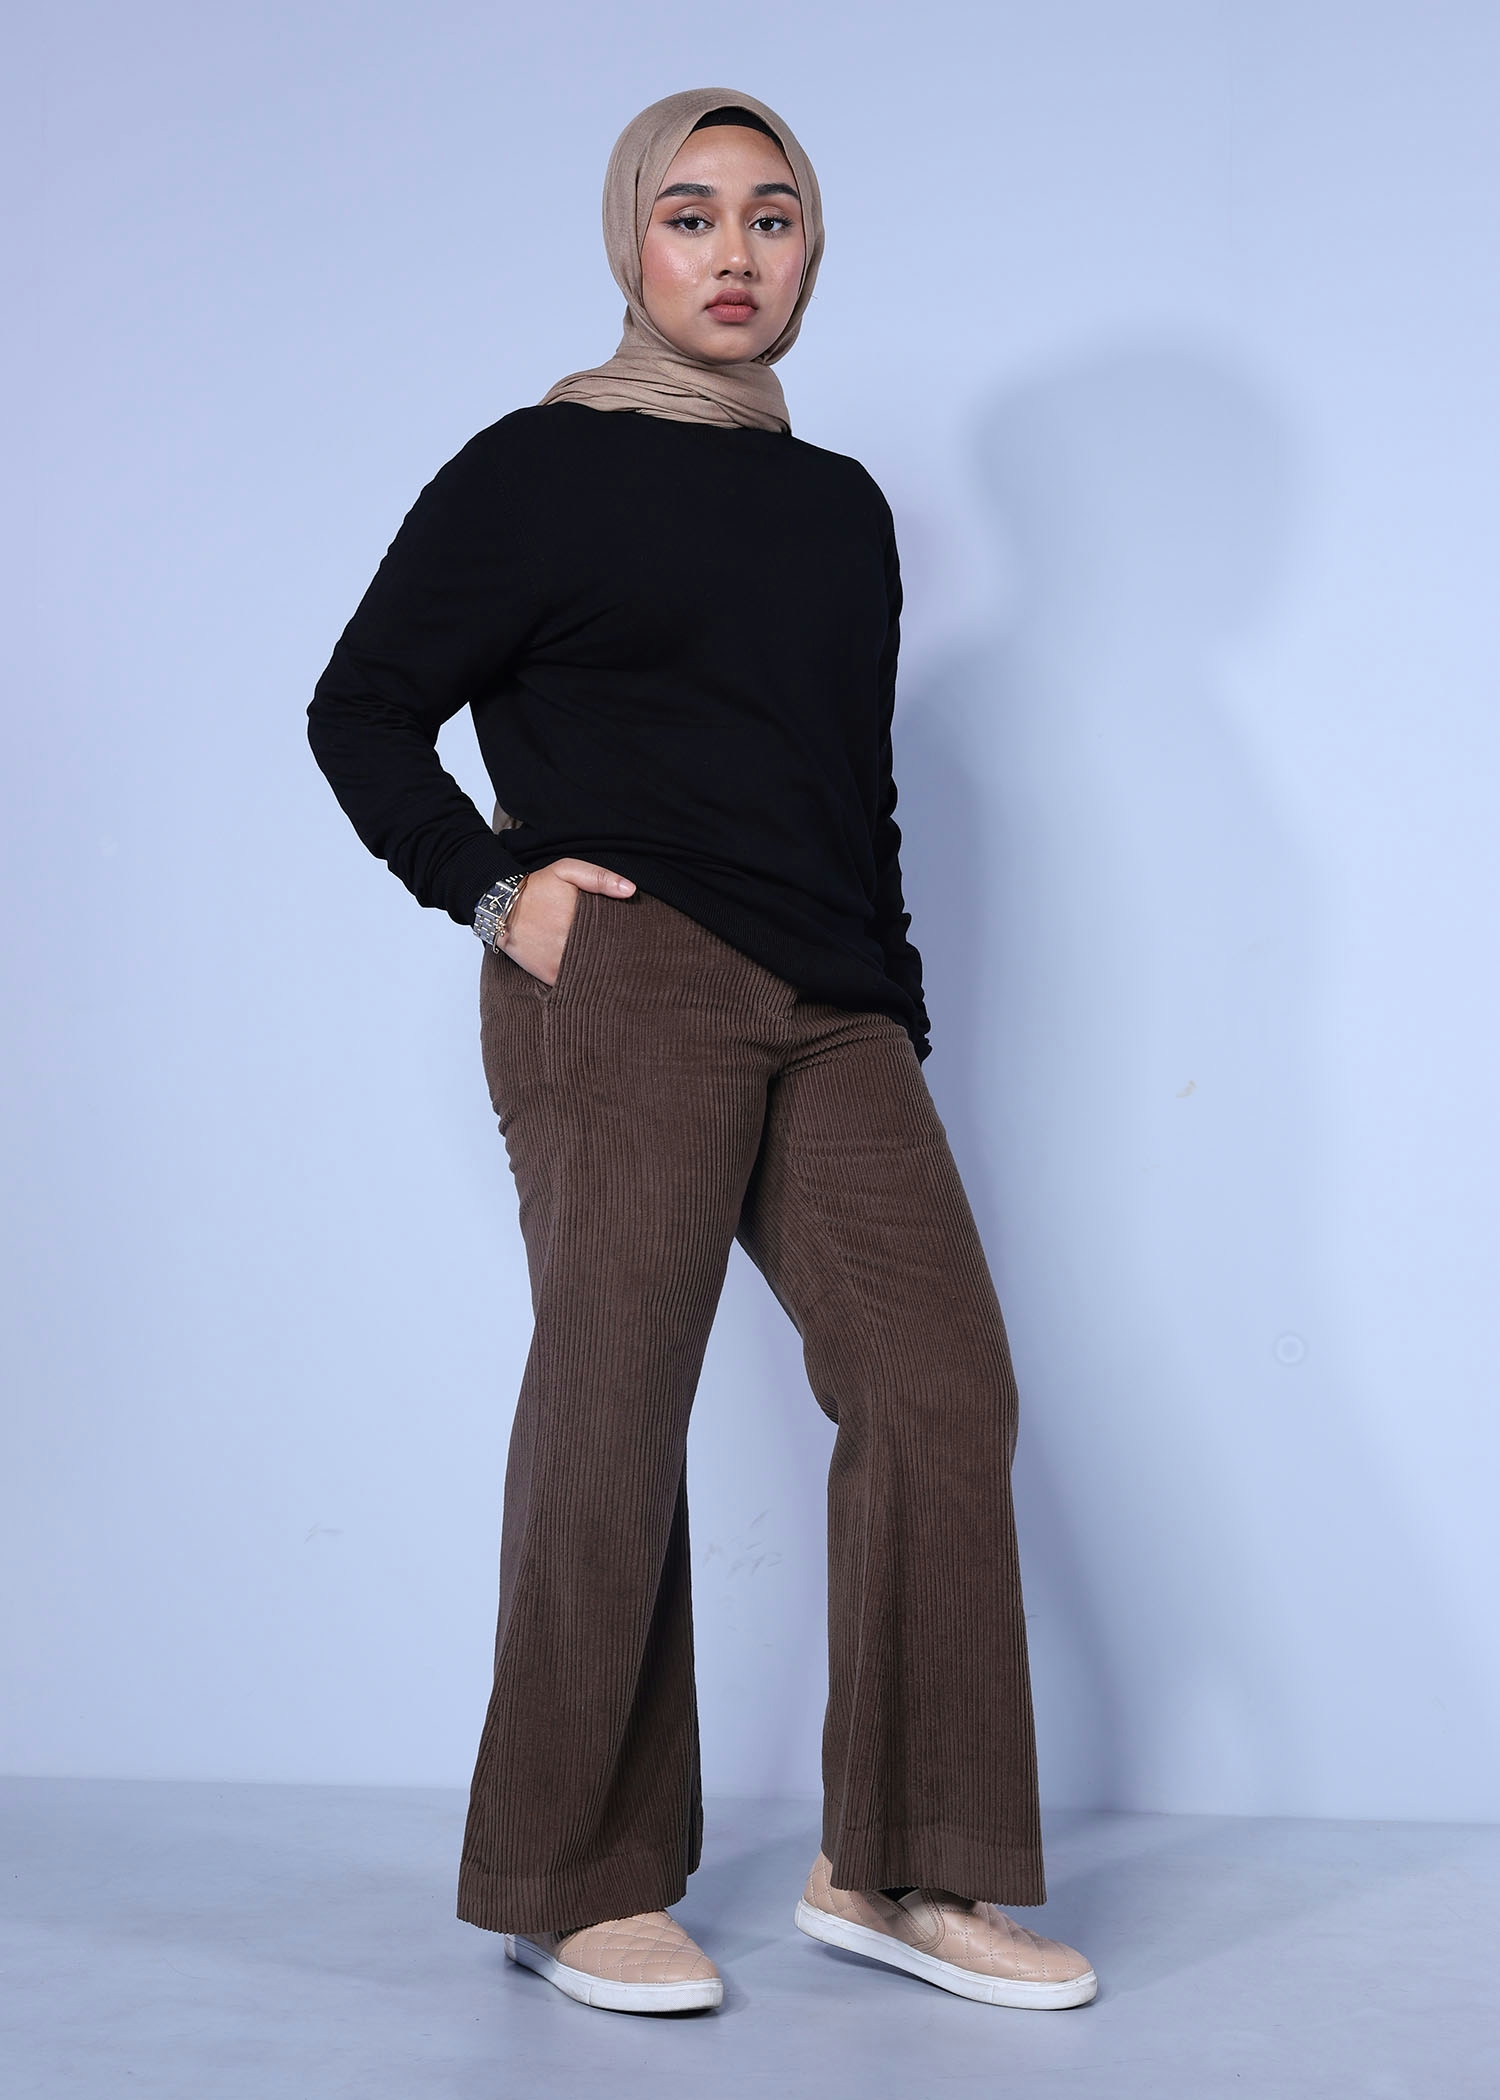 melothria corduroy ladies pant cofffee color full side view